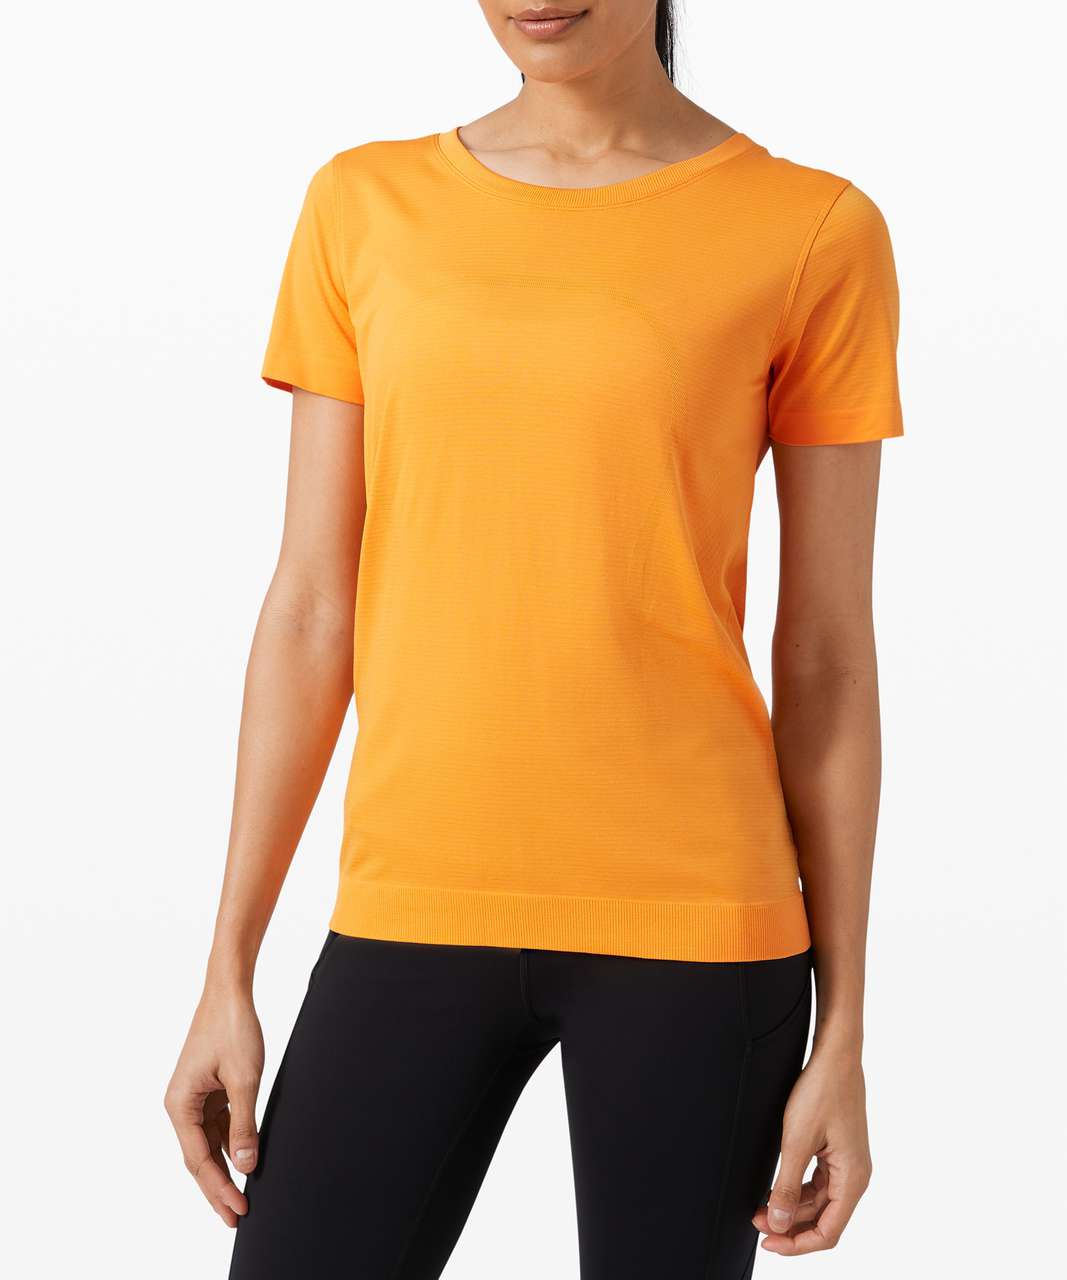 Lululemon Swiftly Relaxed Short Sleeve 2.0 - Tiger / Tiger